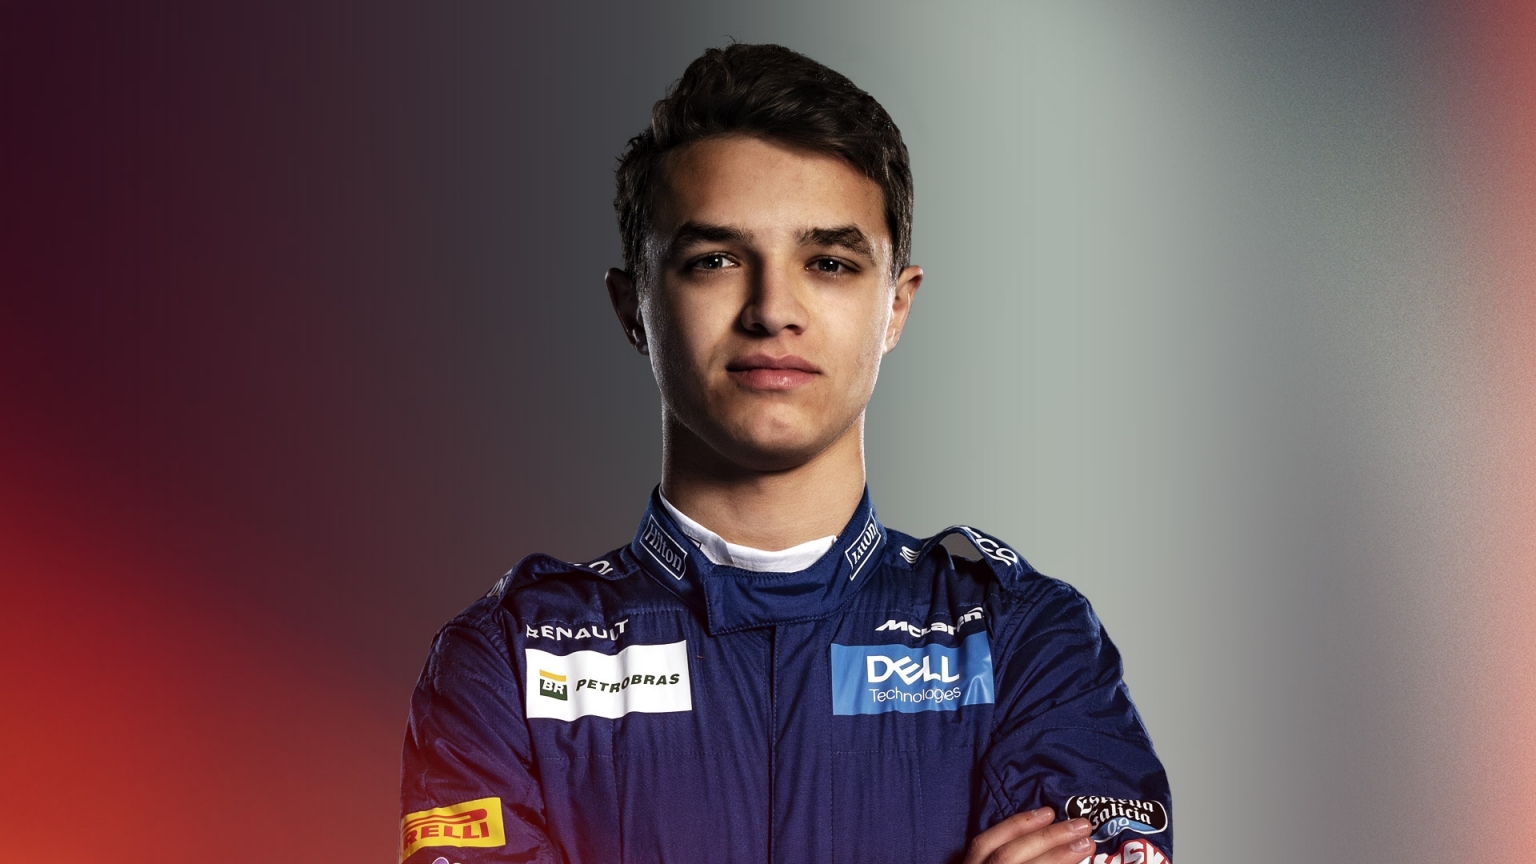 Lando Norris confirmed for INDYCAR iRacing round at Circuit of the Americas